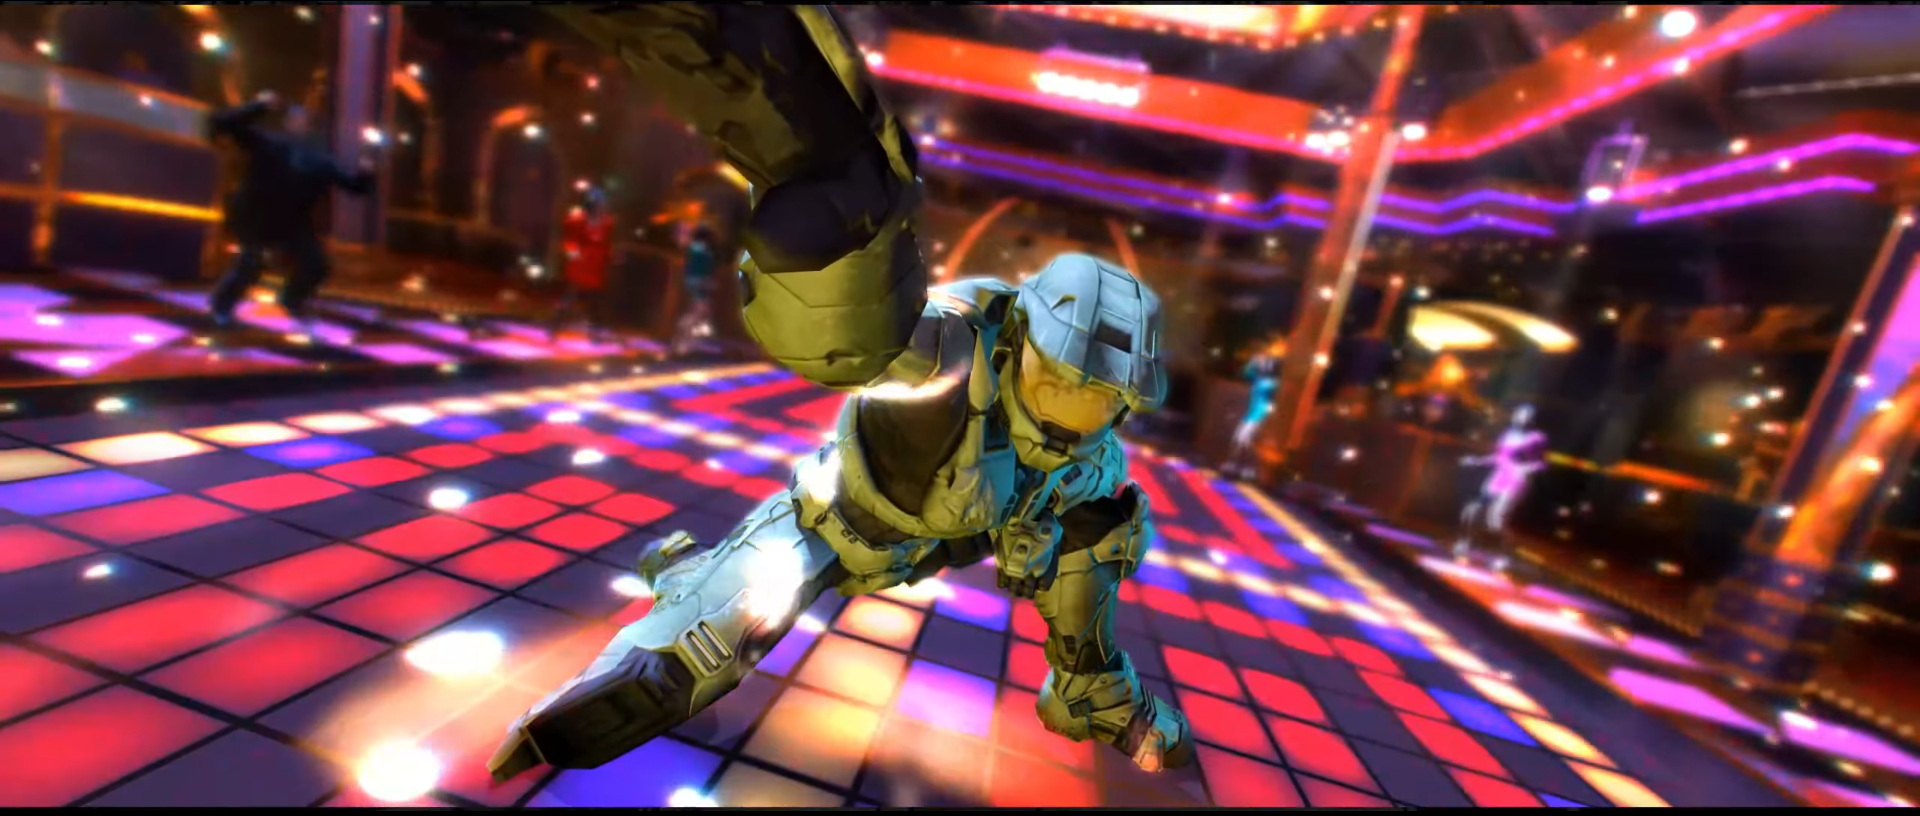 An image of a modified Yakuza 0 replacing disco-dancing protagonist Kiryu with Master Chief, an armored super soldier, on a light-up dance floor